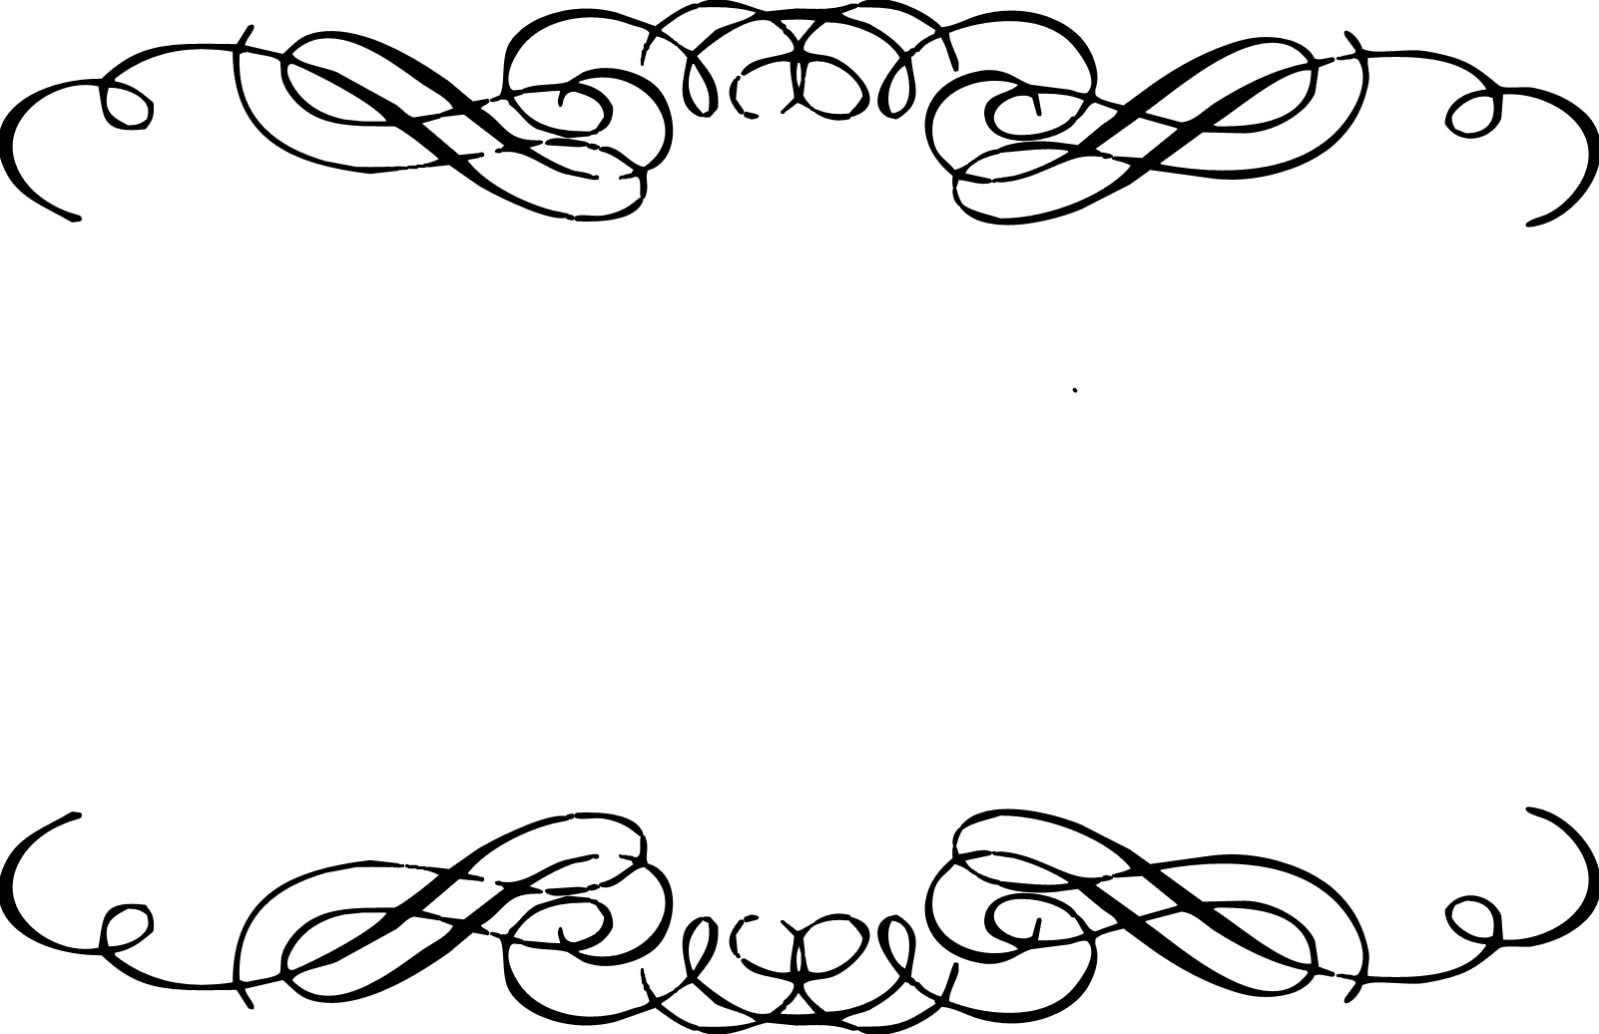 Floral Scroll Frame Clip Art Free Download - Clipart library